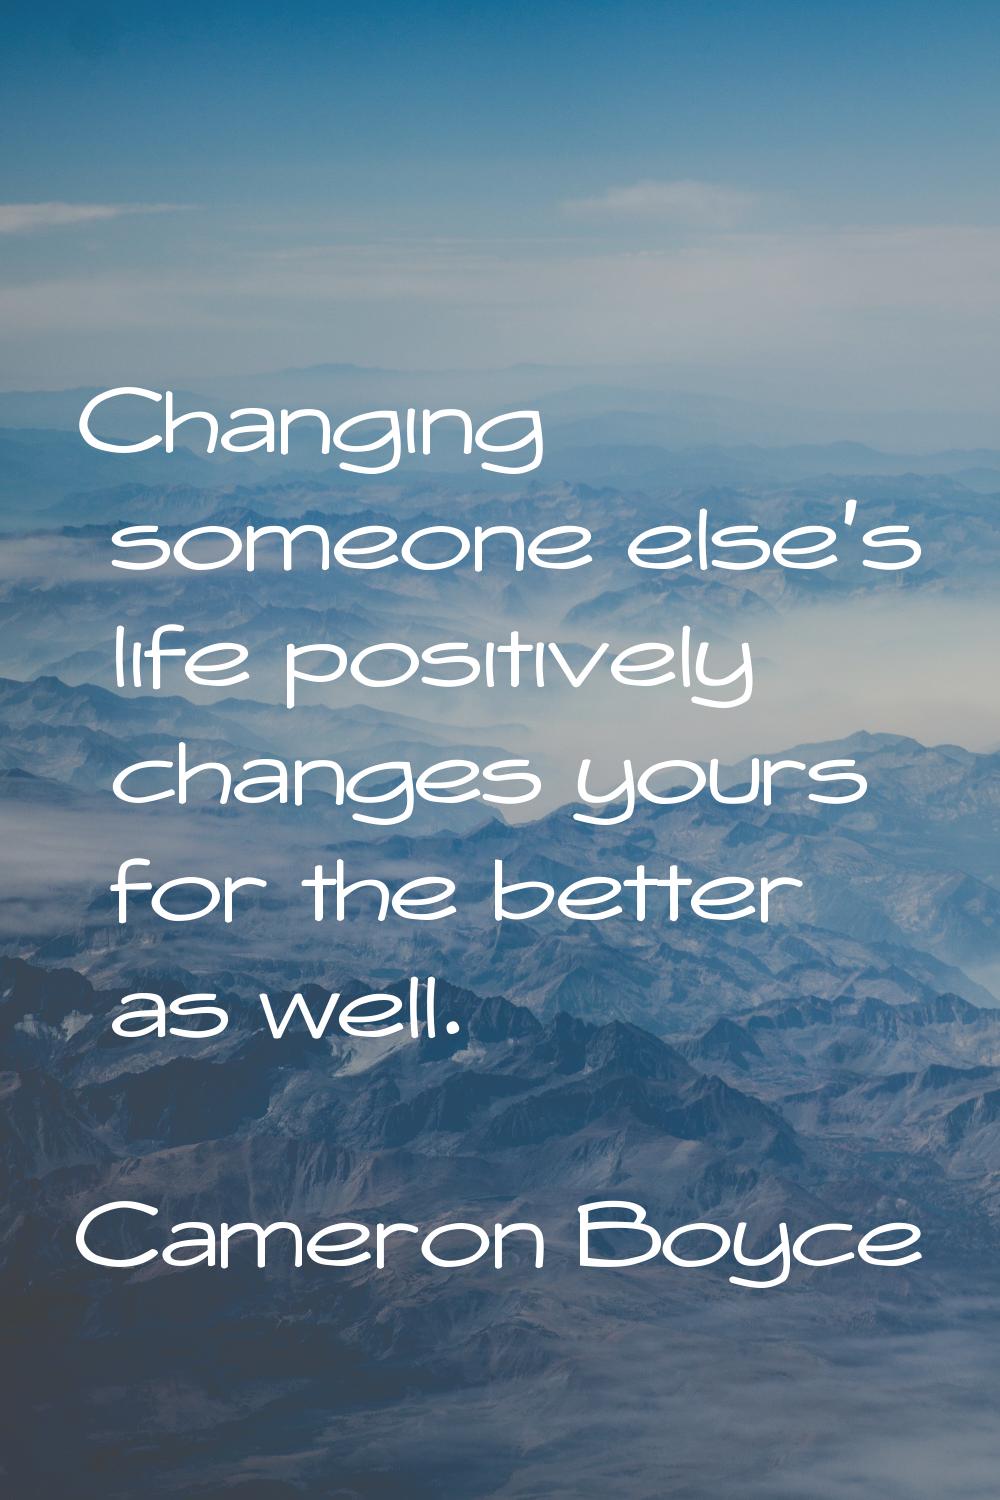 Changing someone else's life positively changes yours for the better as well.